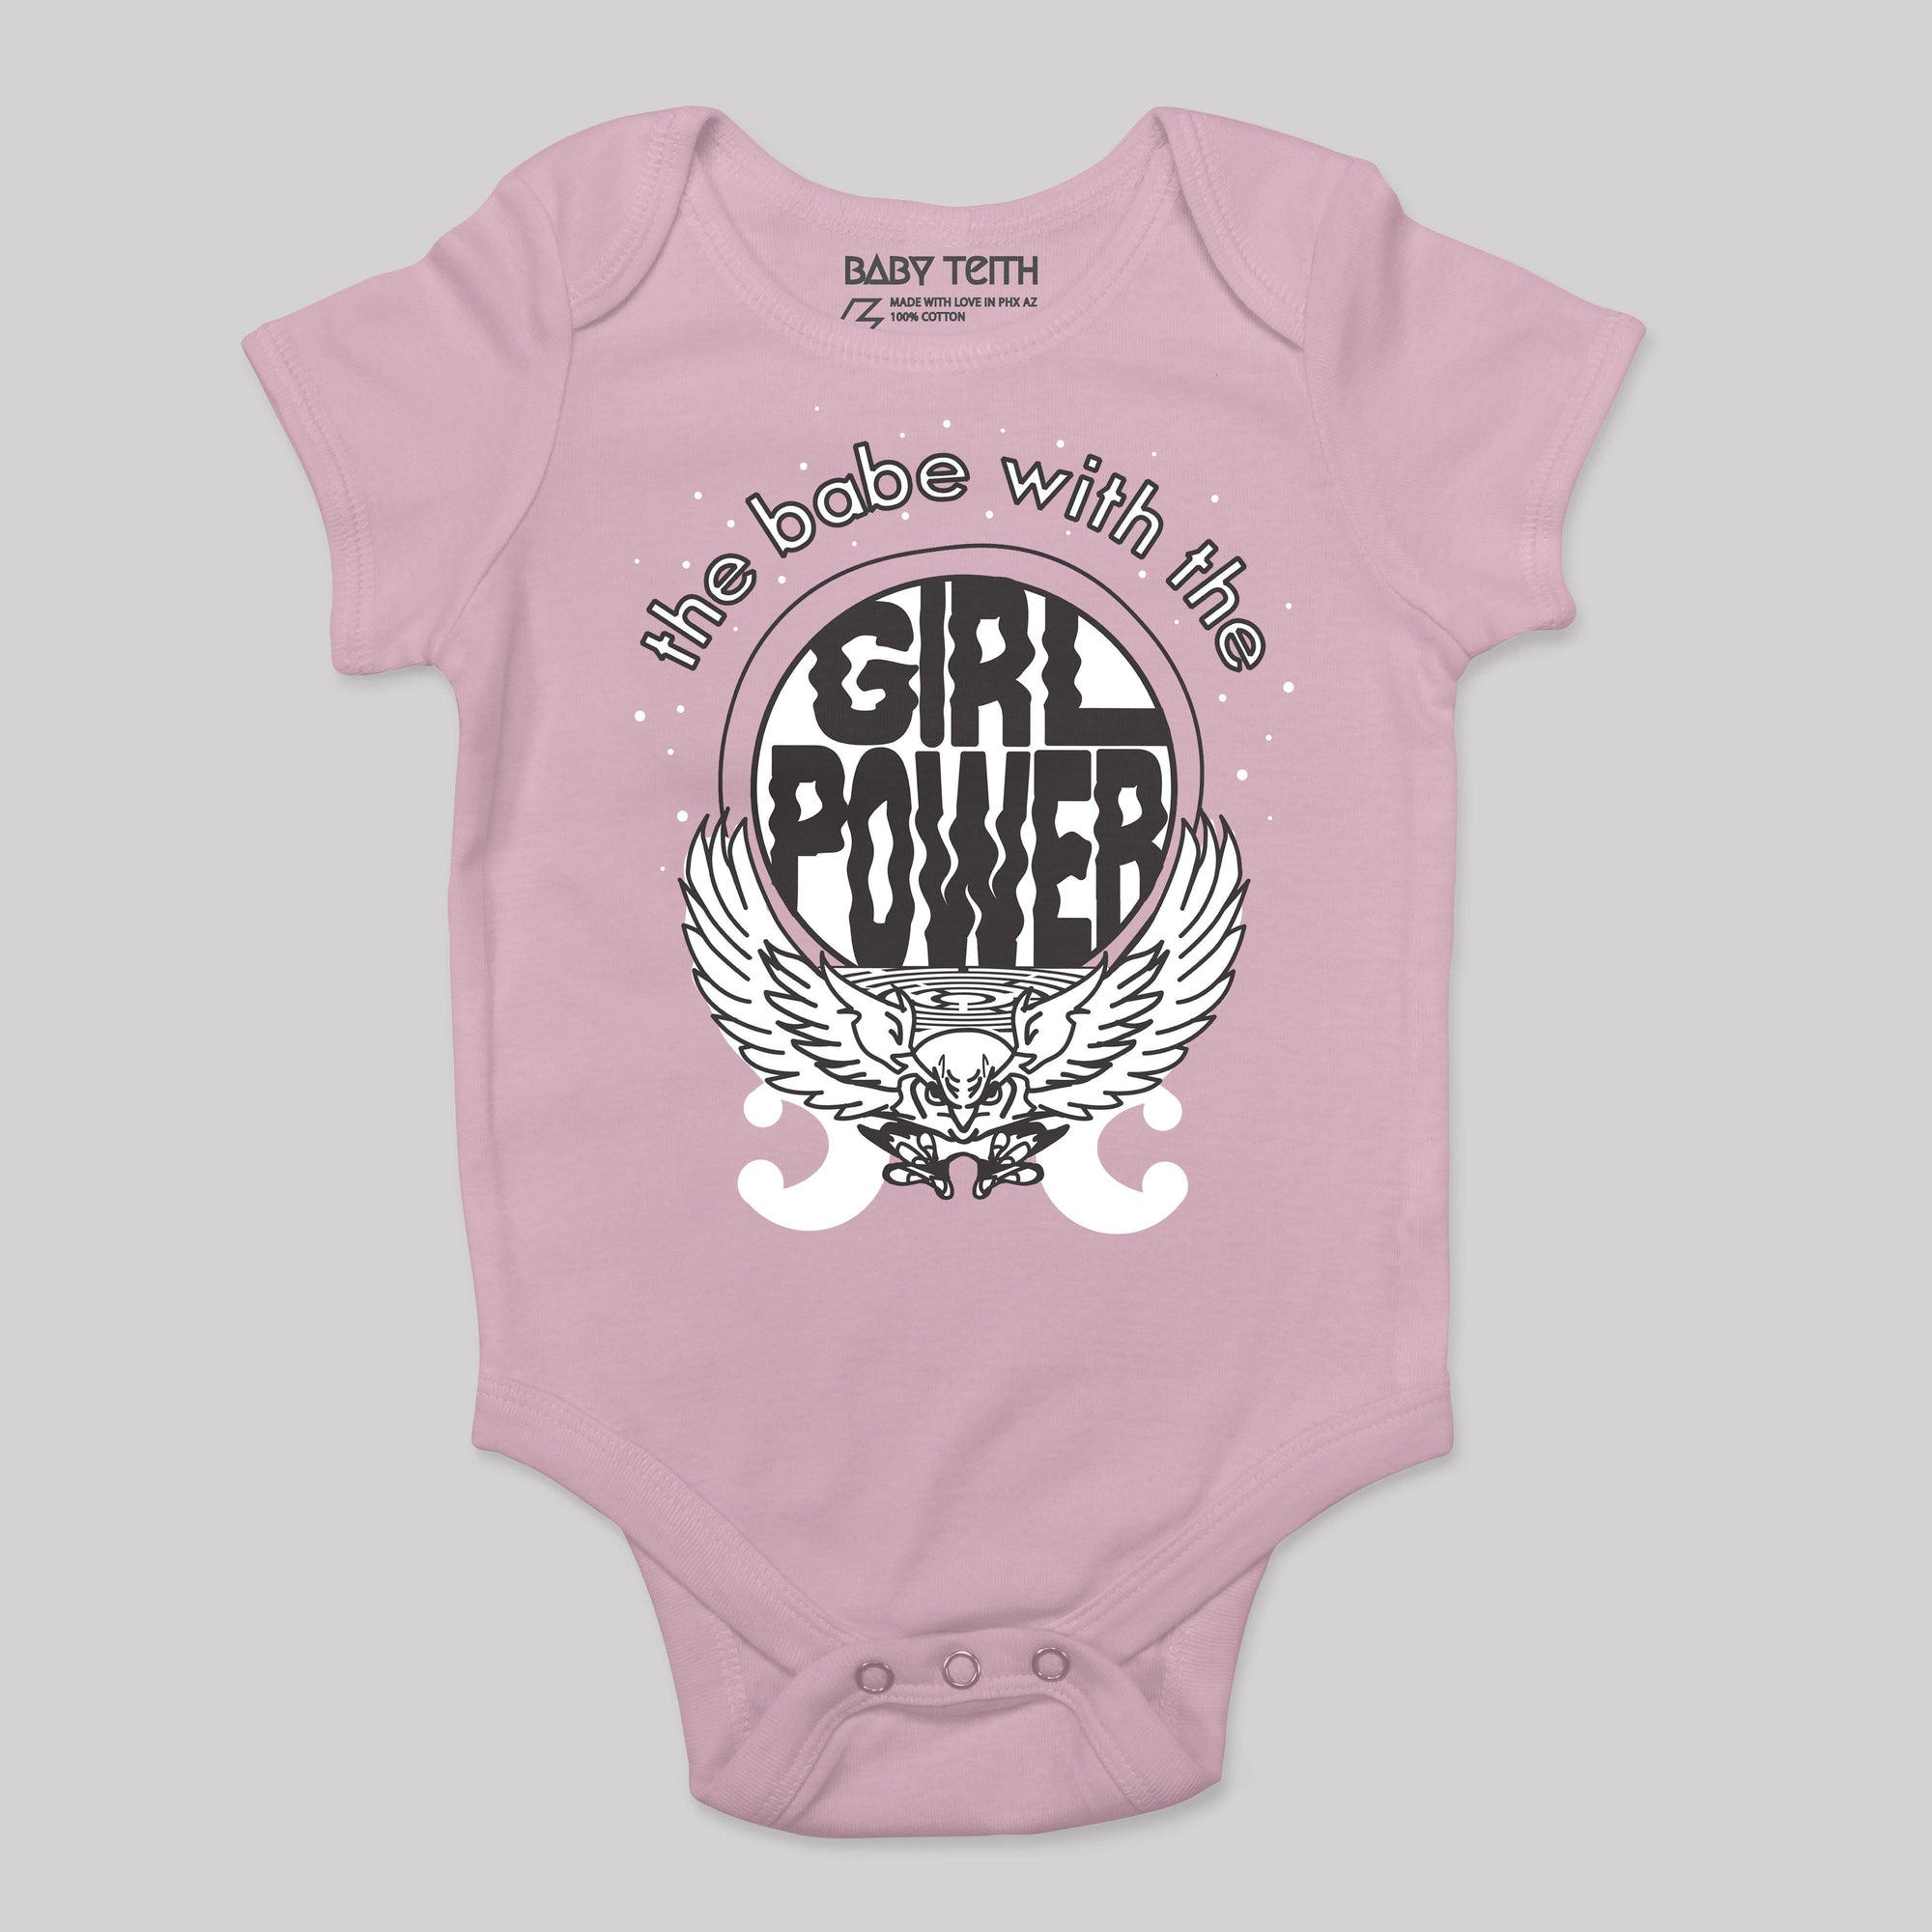 Babe with the Girl Power Bodysuit - Baby Teith